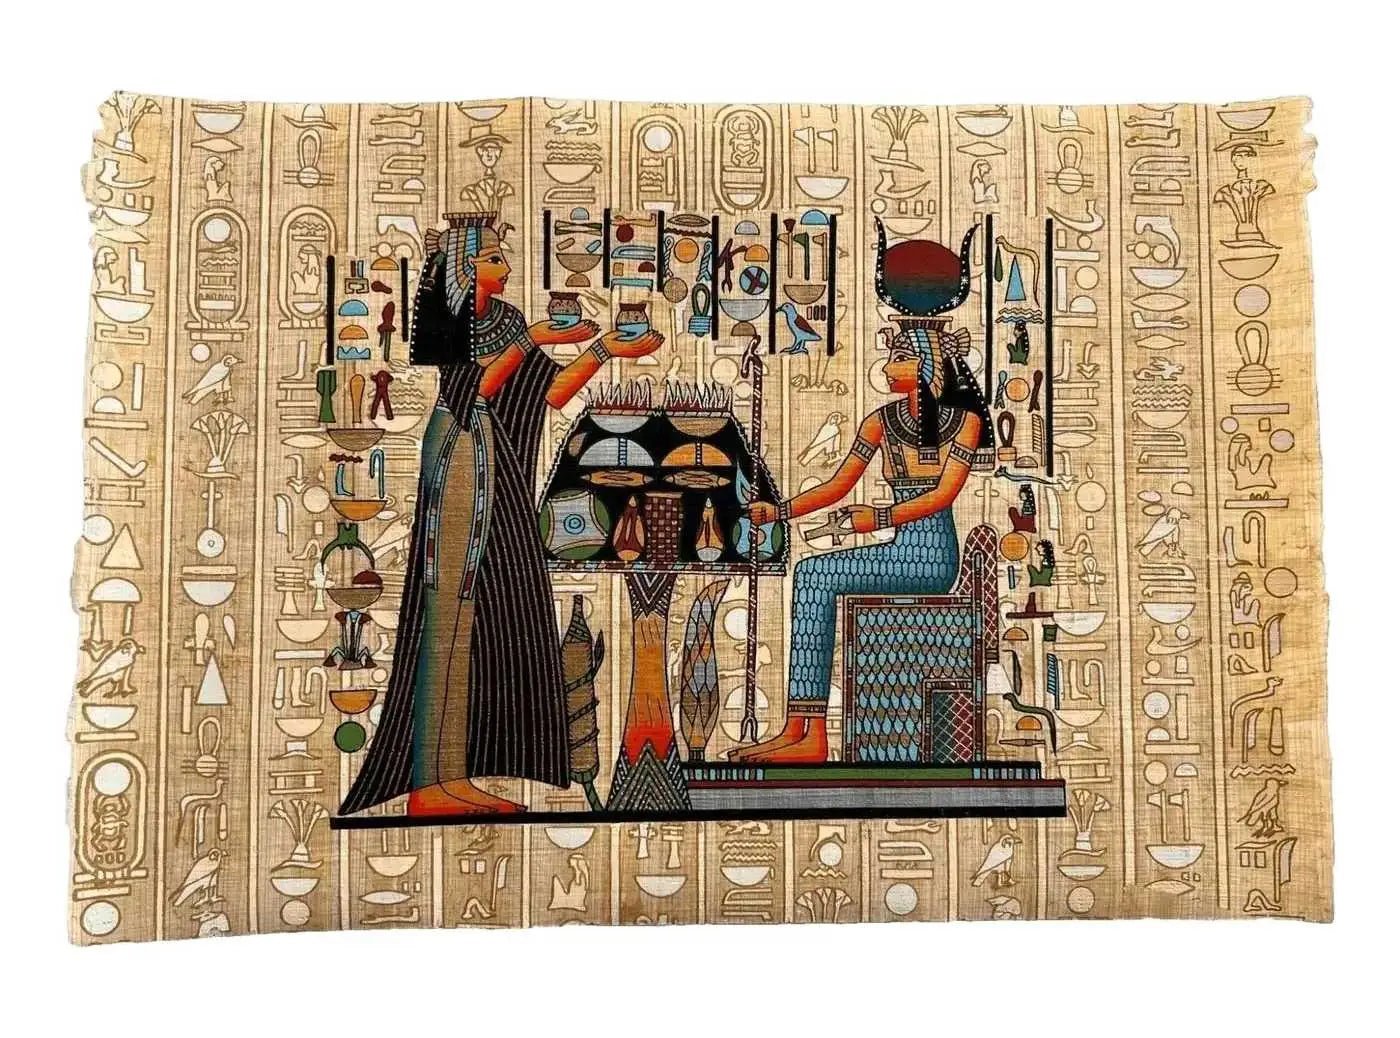 Queen Nefertari Offering Olive Oils to Goddess Isis - Depiction of Olive Oil Presentation in Ancient Egypt - Ancient Offering Table